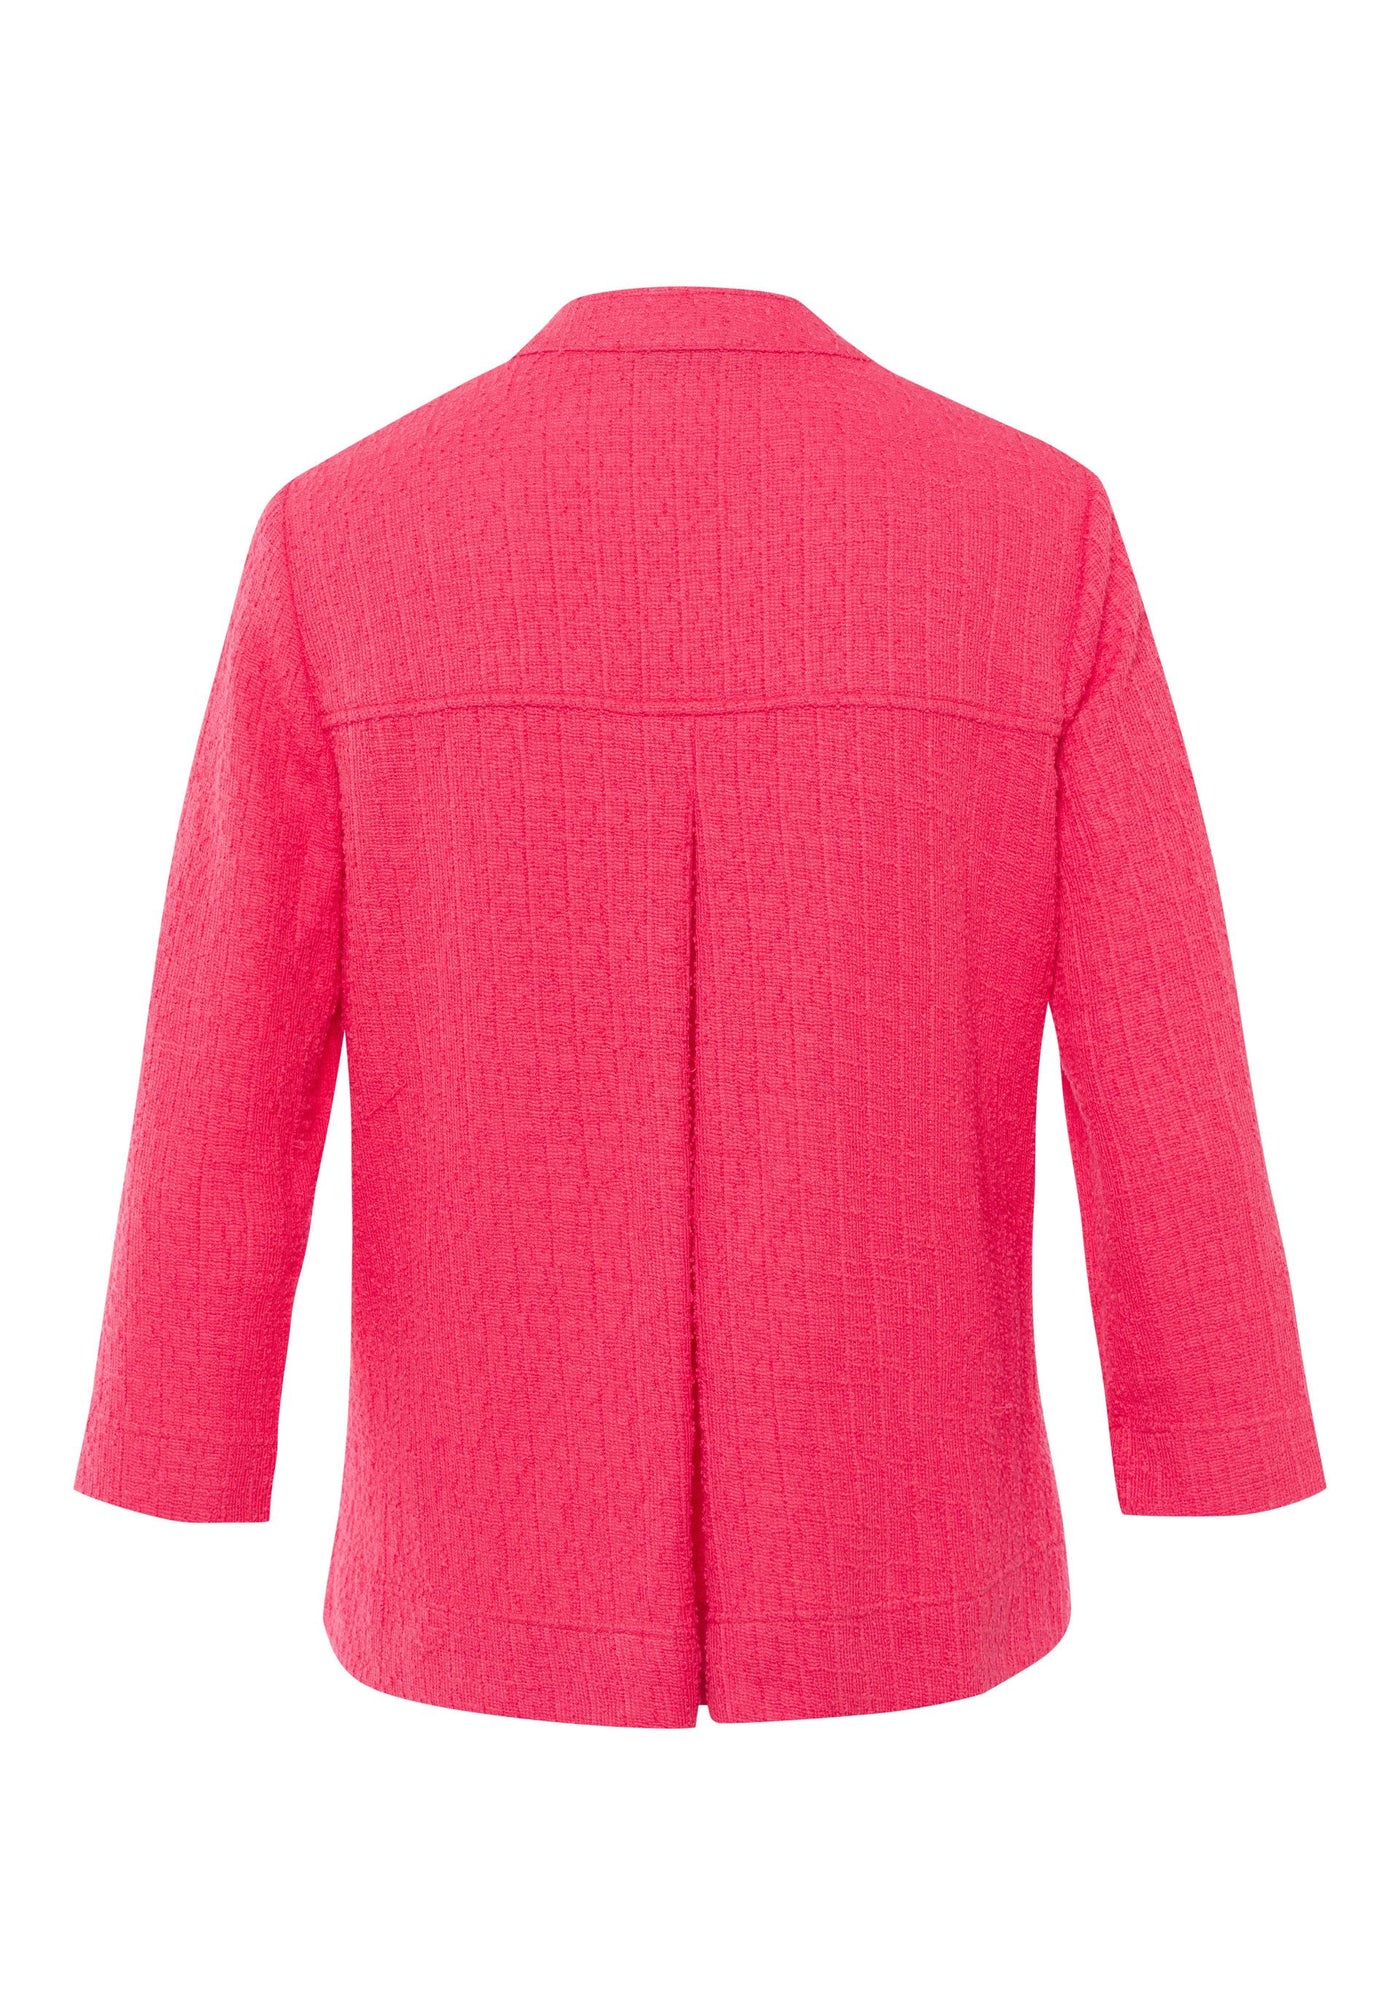 Soft Pink Tweed Style Round Neck Jacket with Buttons